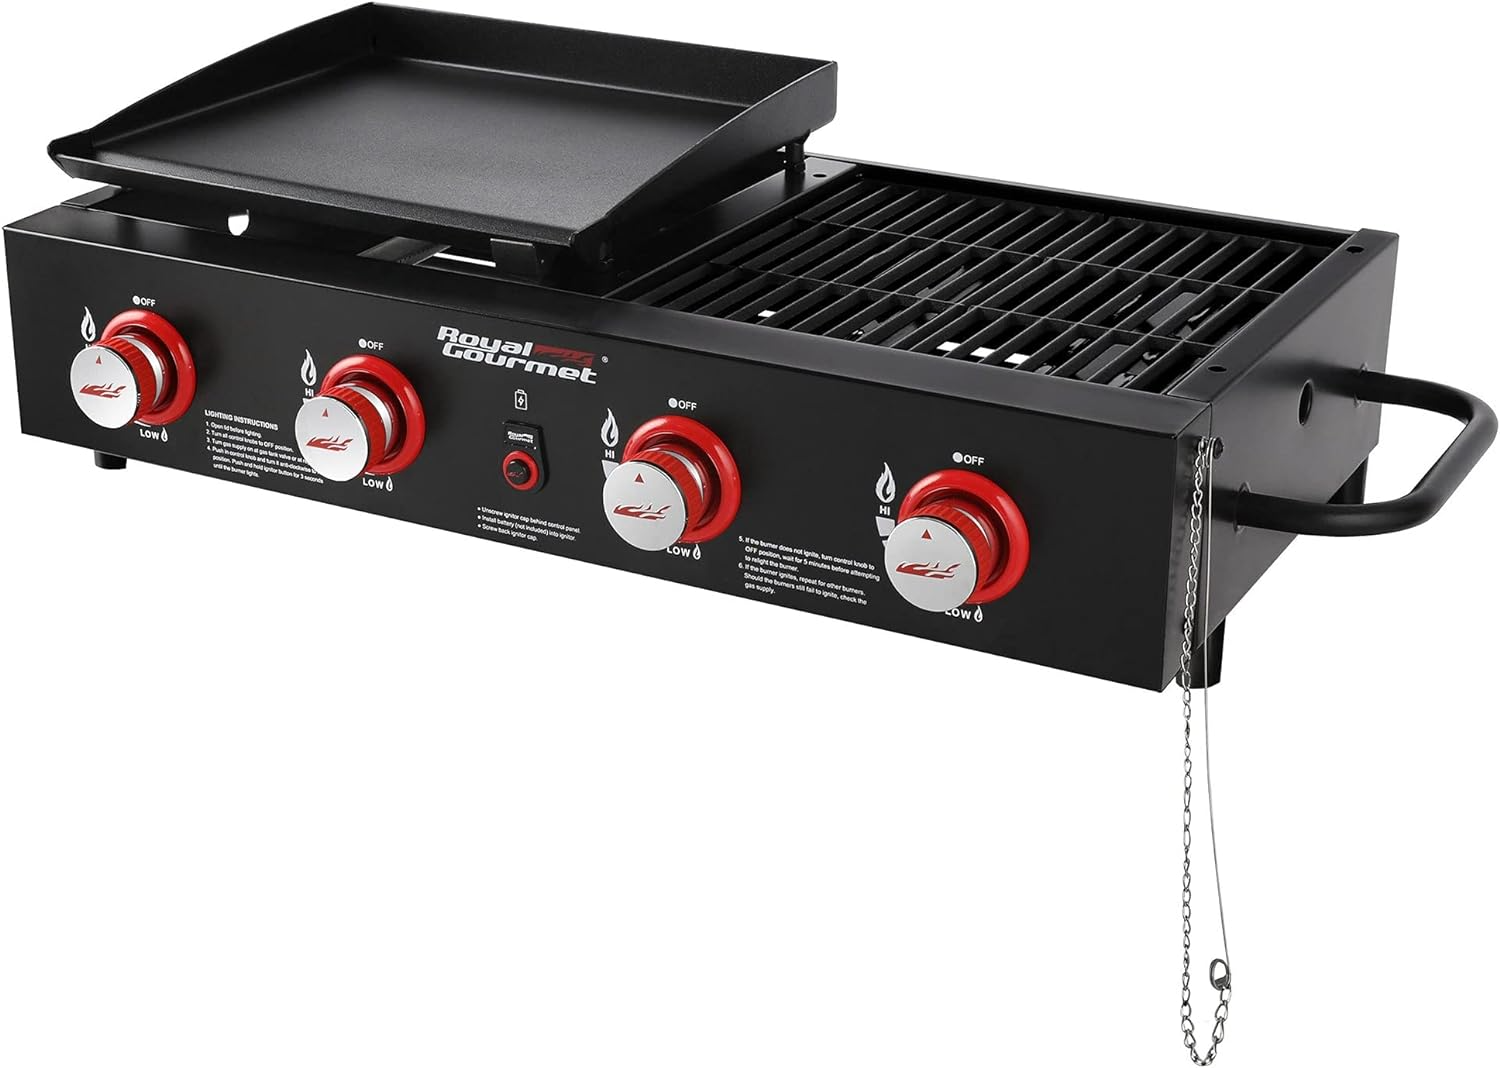 Royal Gourmet GD4002T 4-Burner Tailgater Grill & Griddle Combo, Portable Propane Gas Grill and Griddle, 2-in-1 Combo Design for Backyard or Outdoor BBQ Cooking, 40,000 BTU, Black - Barbecue Whizz...Watch My Smoke!